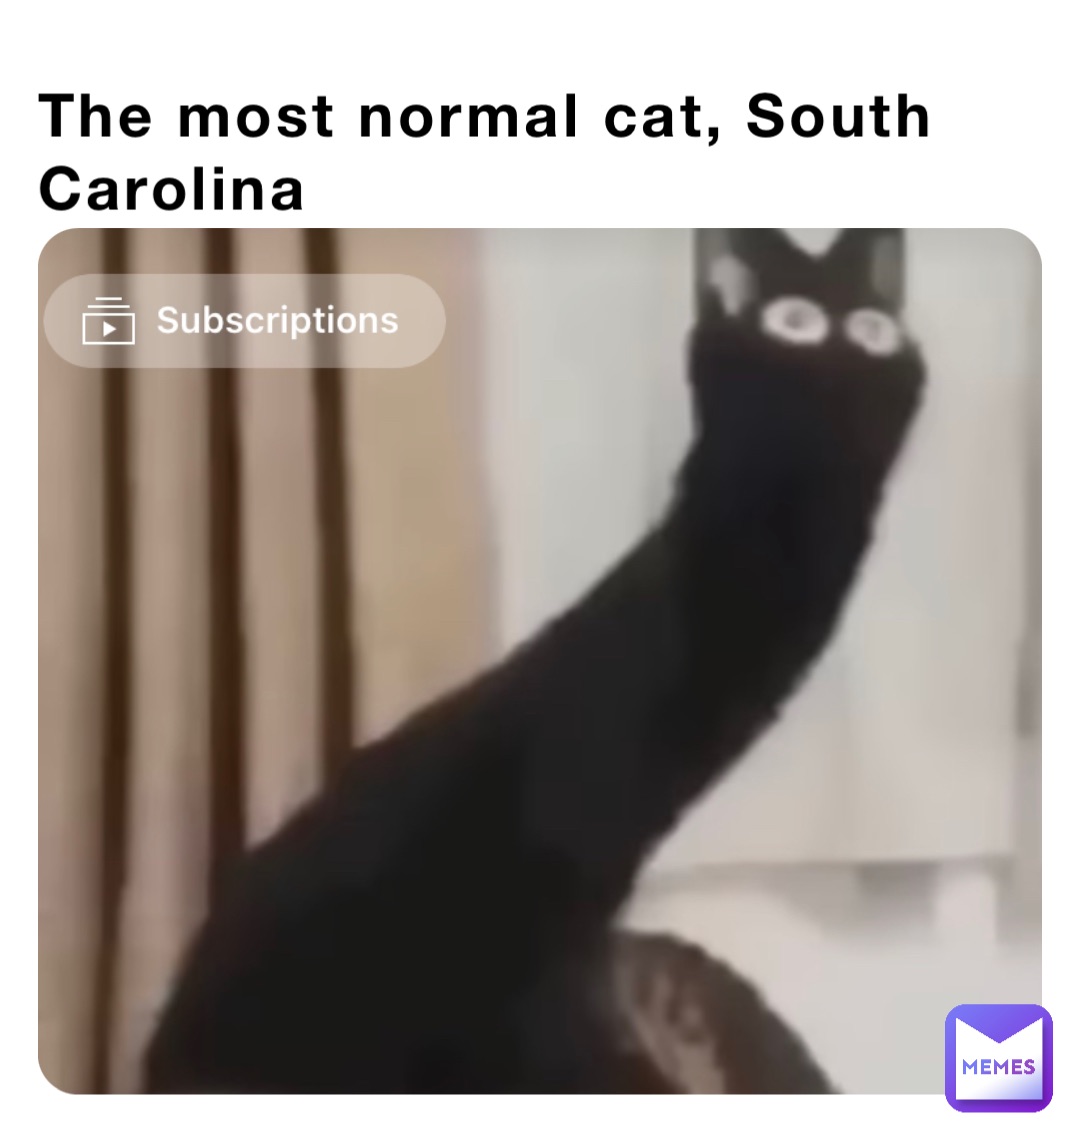 The most normal cat, South Carolina